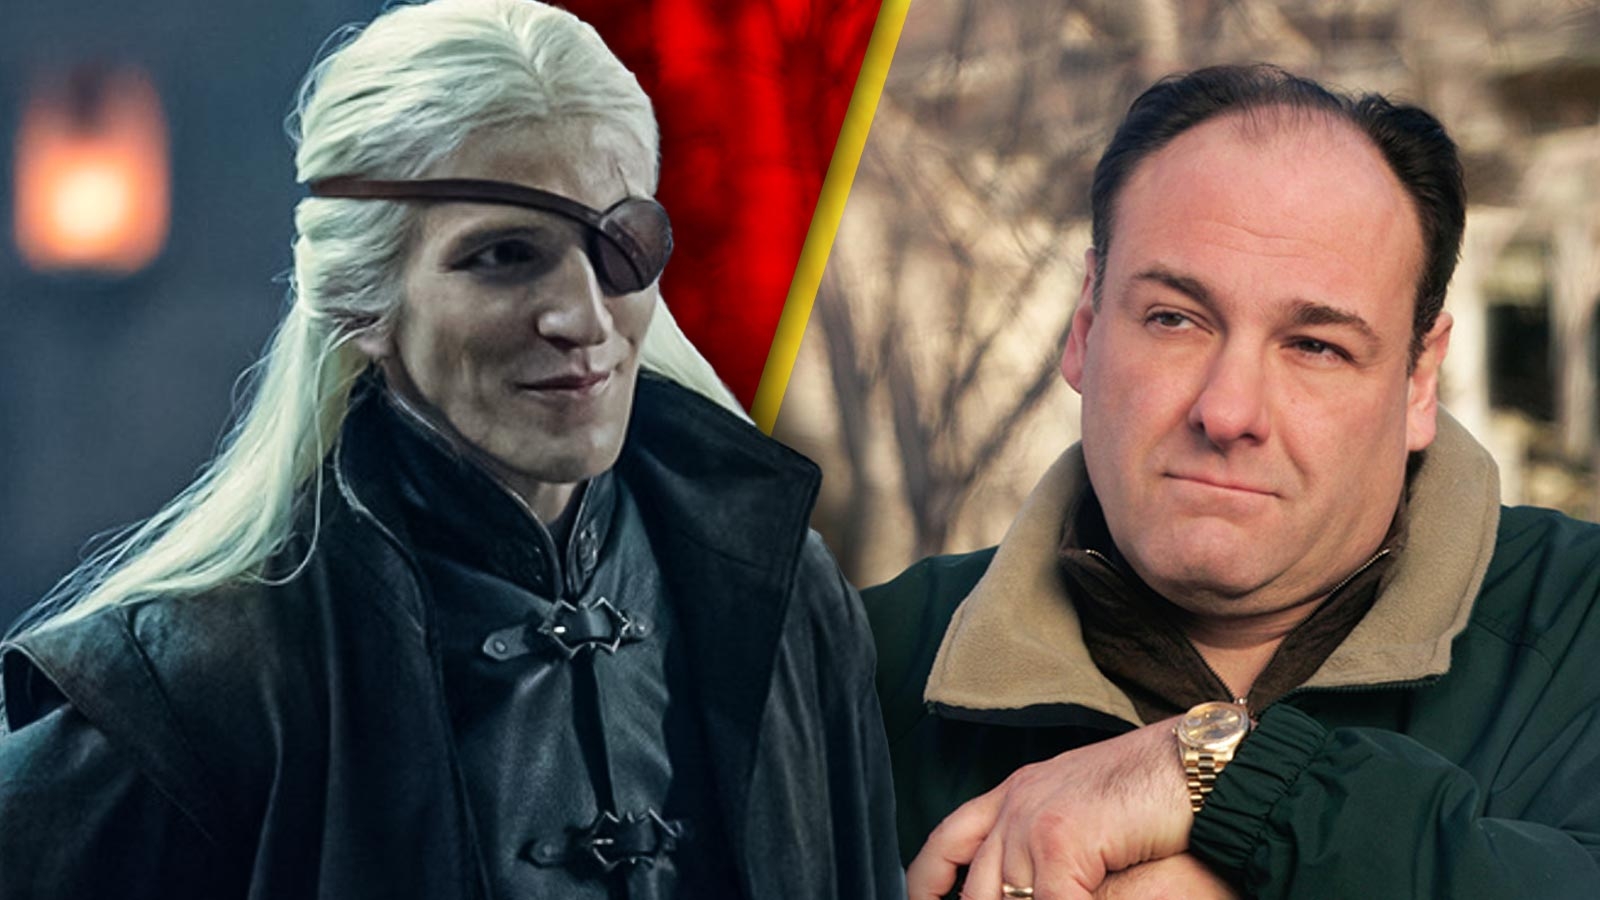 “He would put a stone in his shoe”: Ewan Mitchell Based Aemond Targaryen on Tony Soprano for an Unusual Reason That Pays off in ‘House of the Dragon’